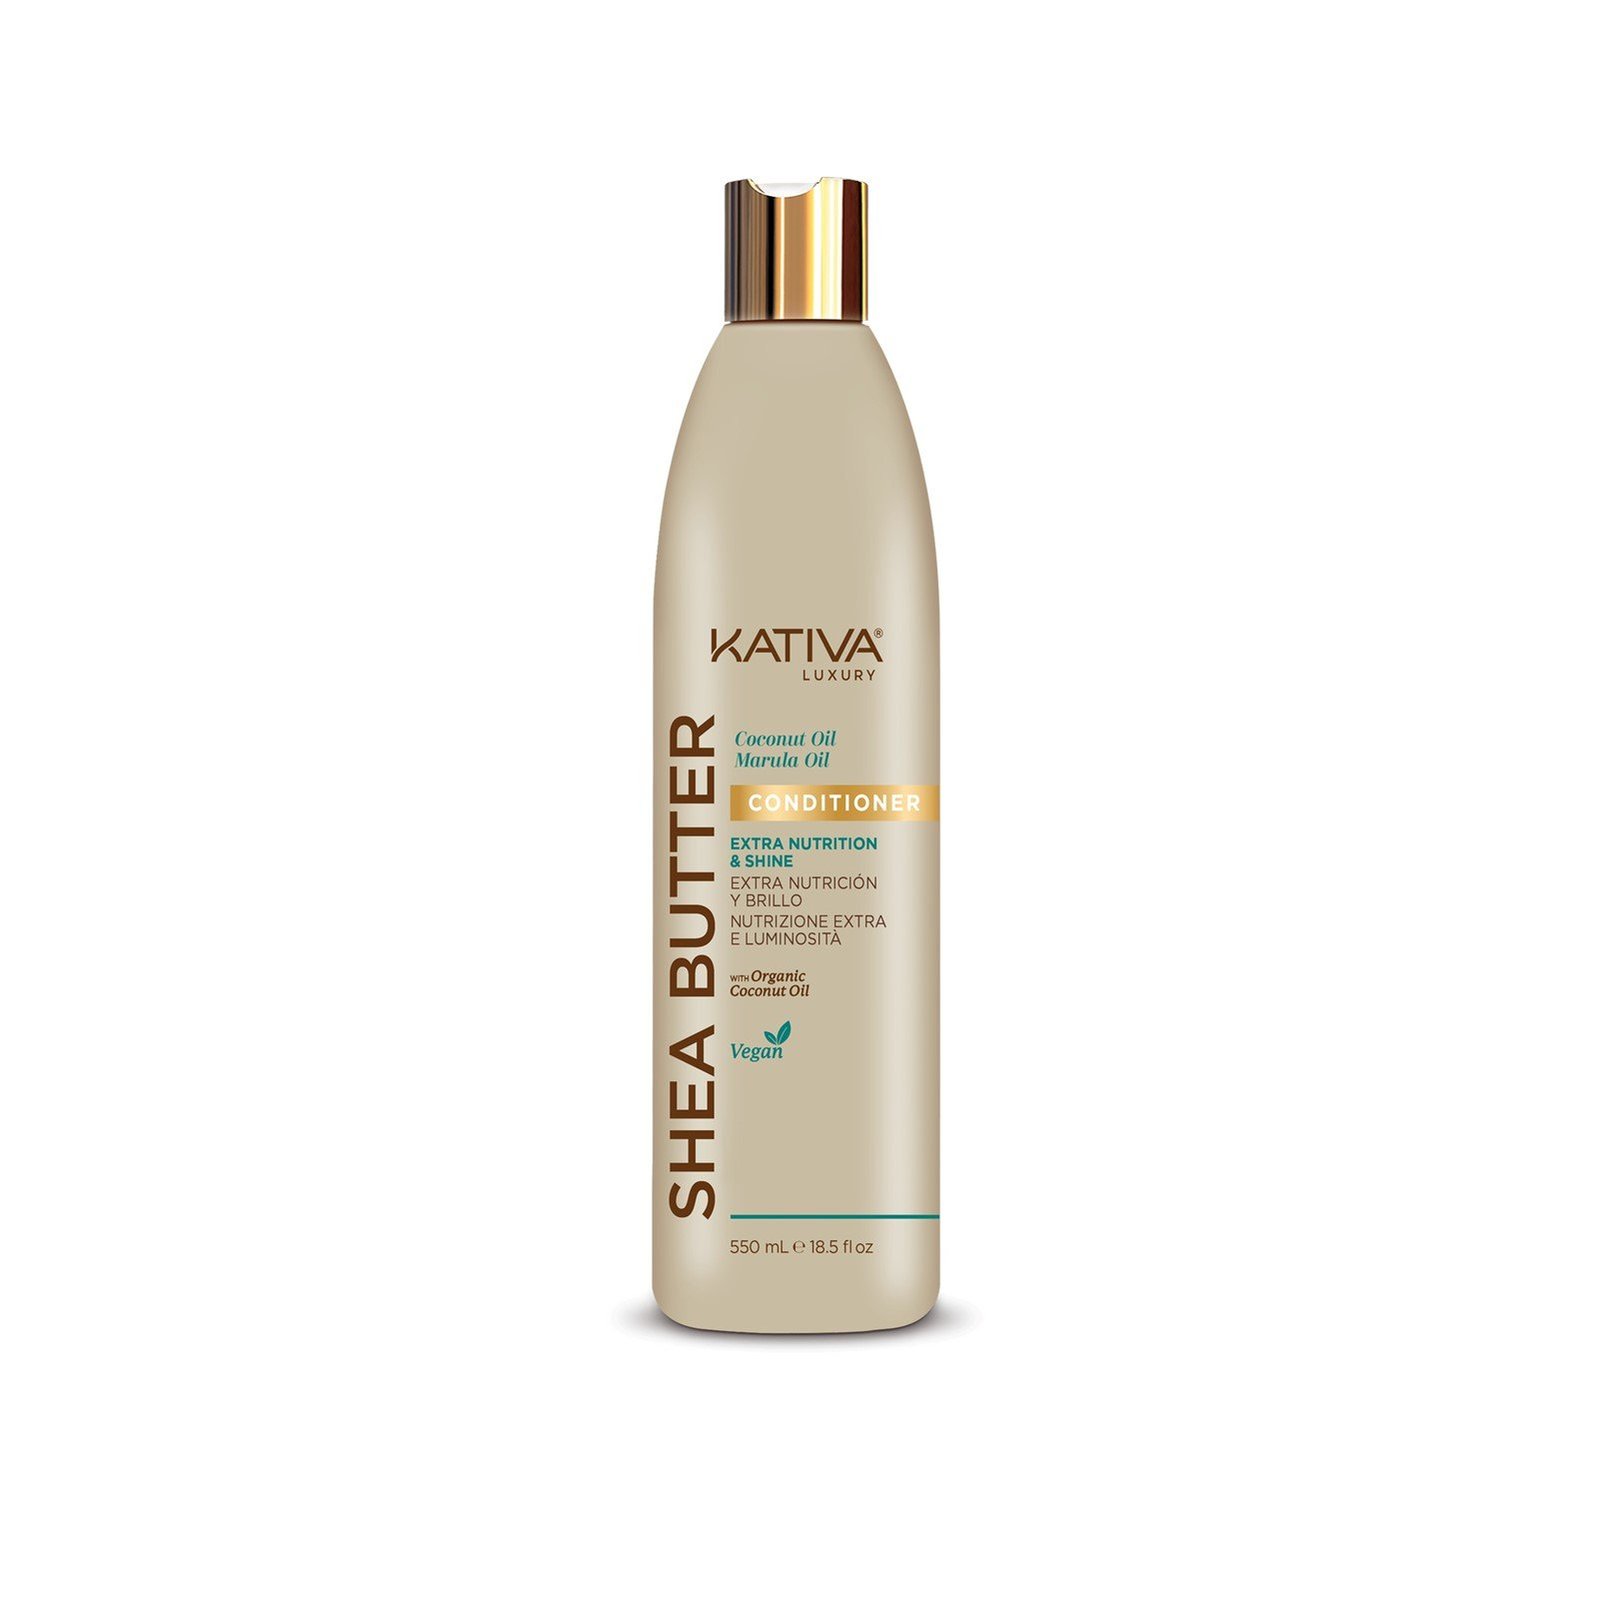 Kativa Luxury Shea Butter Extra Nutrition & Shine Conditioner 550ml